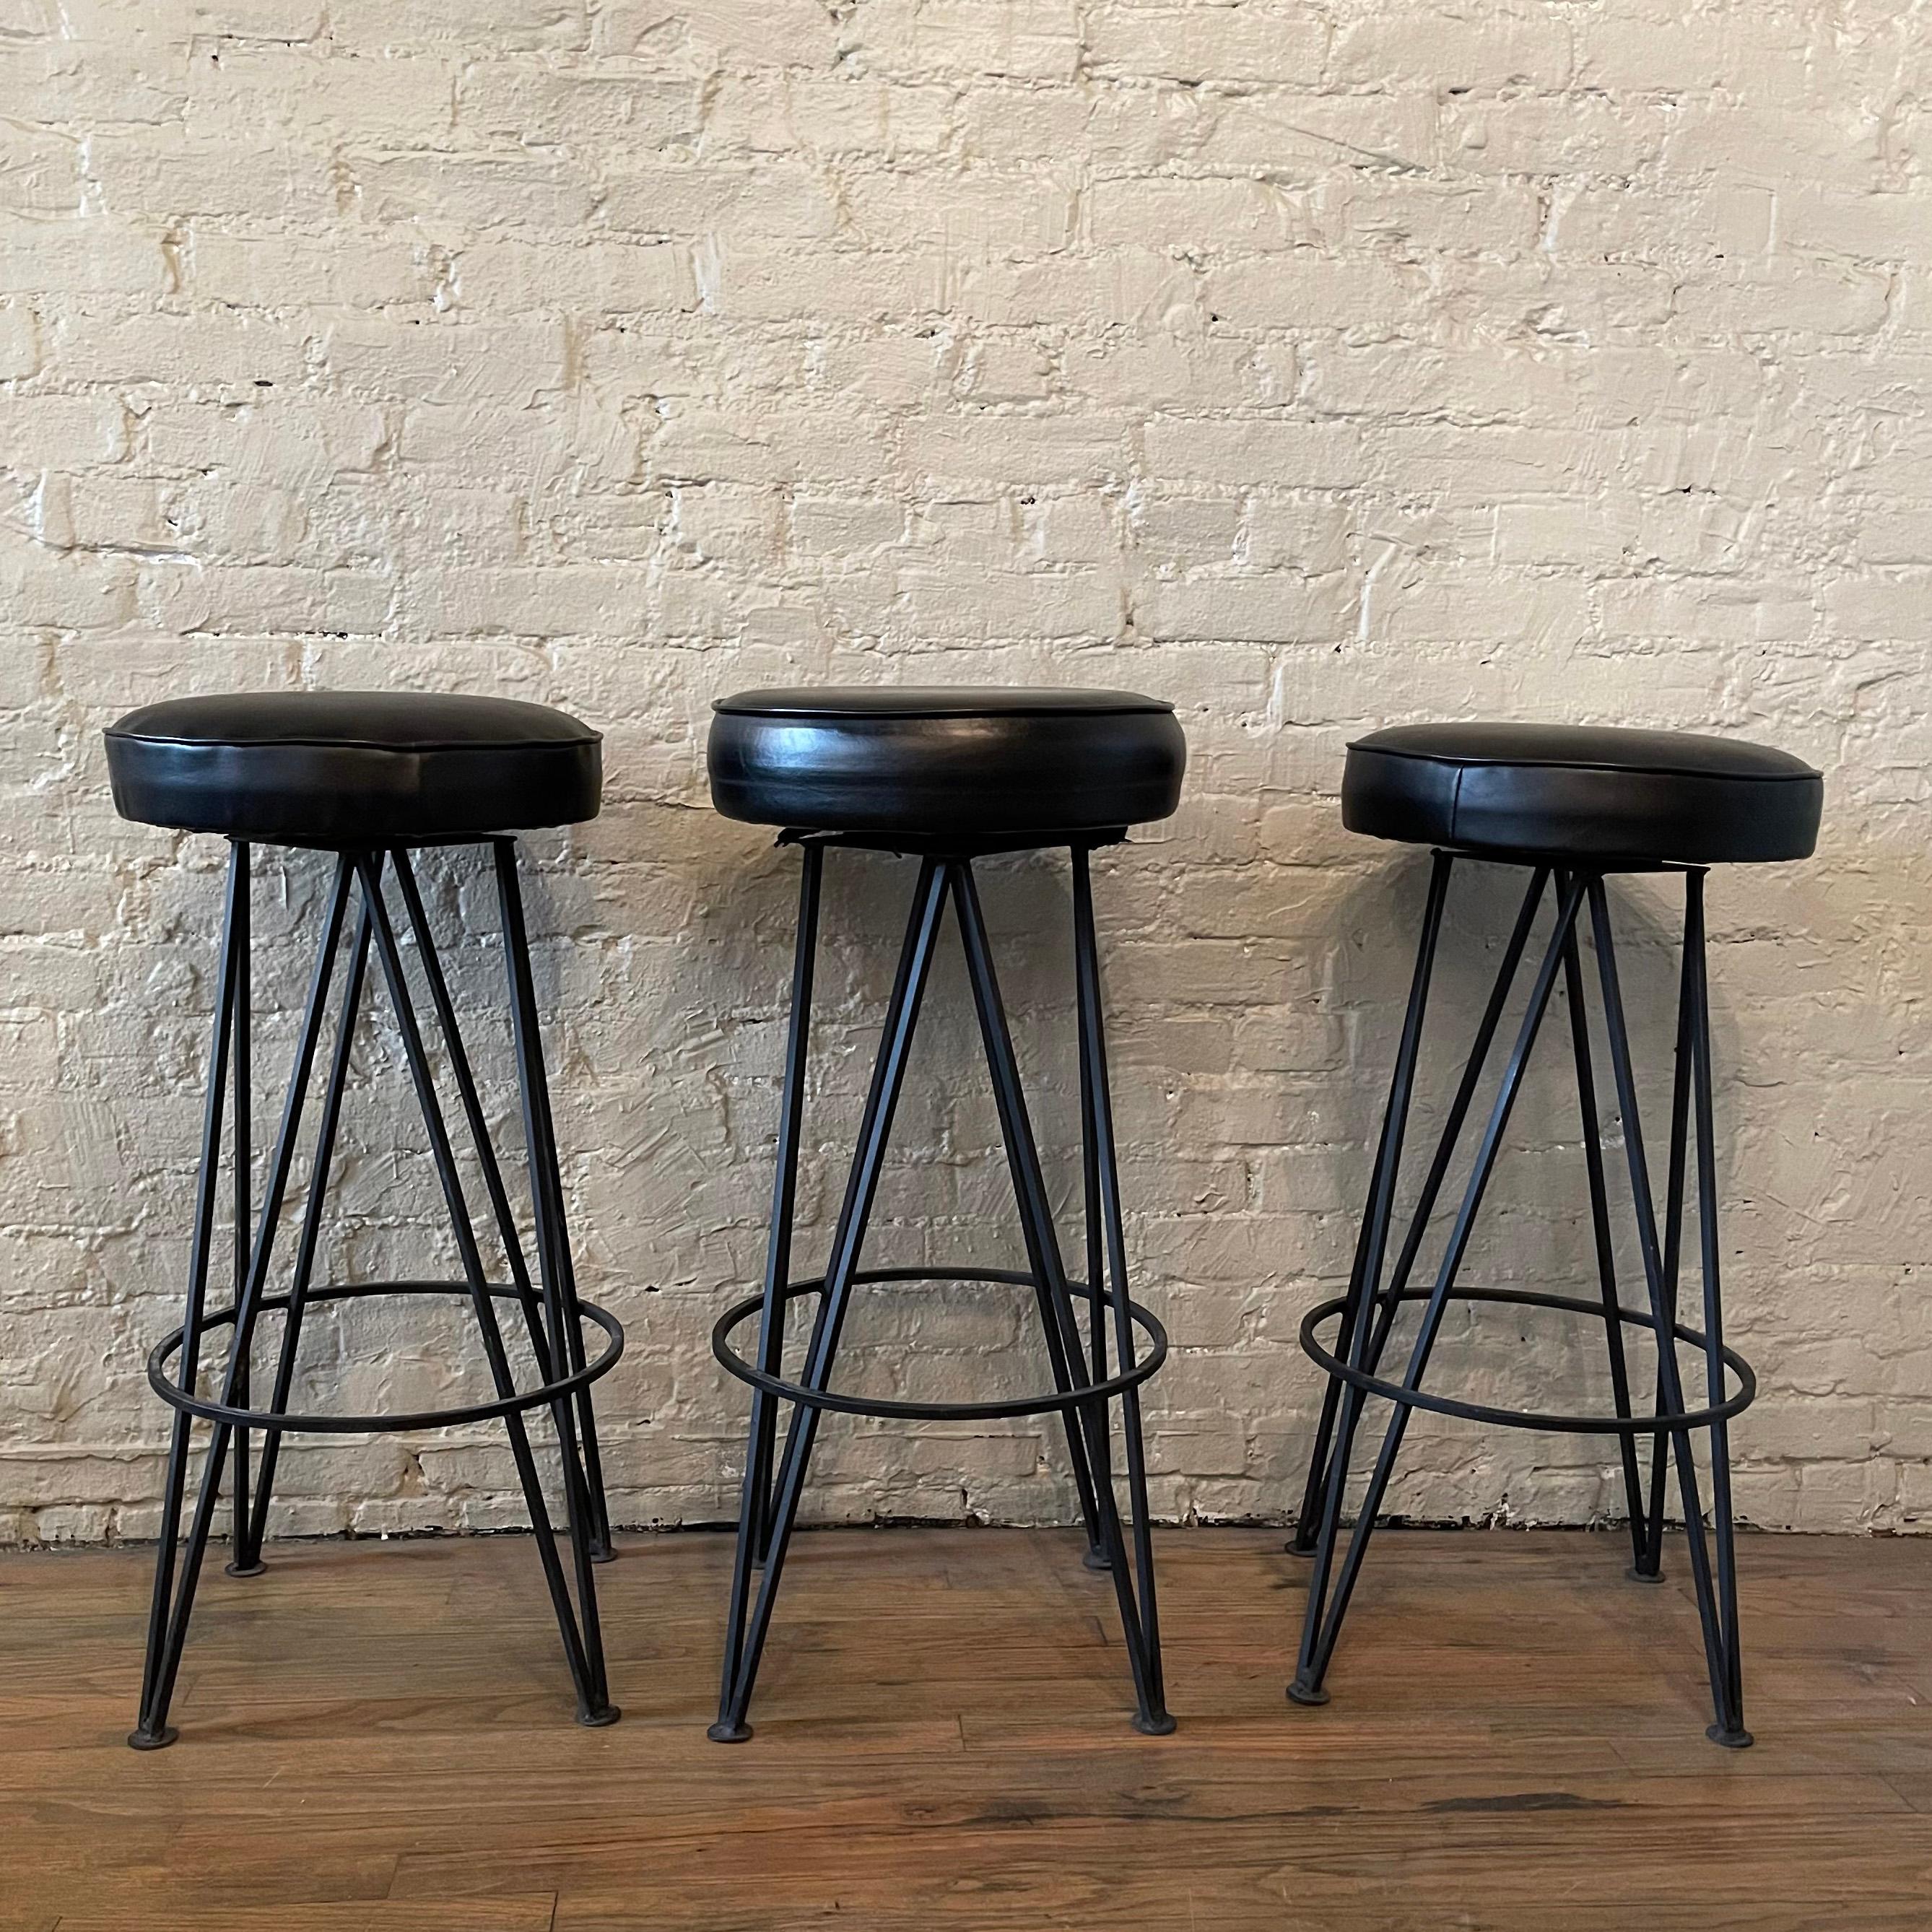 American Mid-Century Modern Wrought Iron Hairpin Bar Stools For Sale